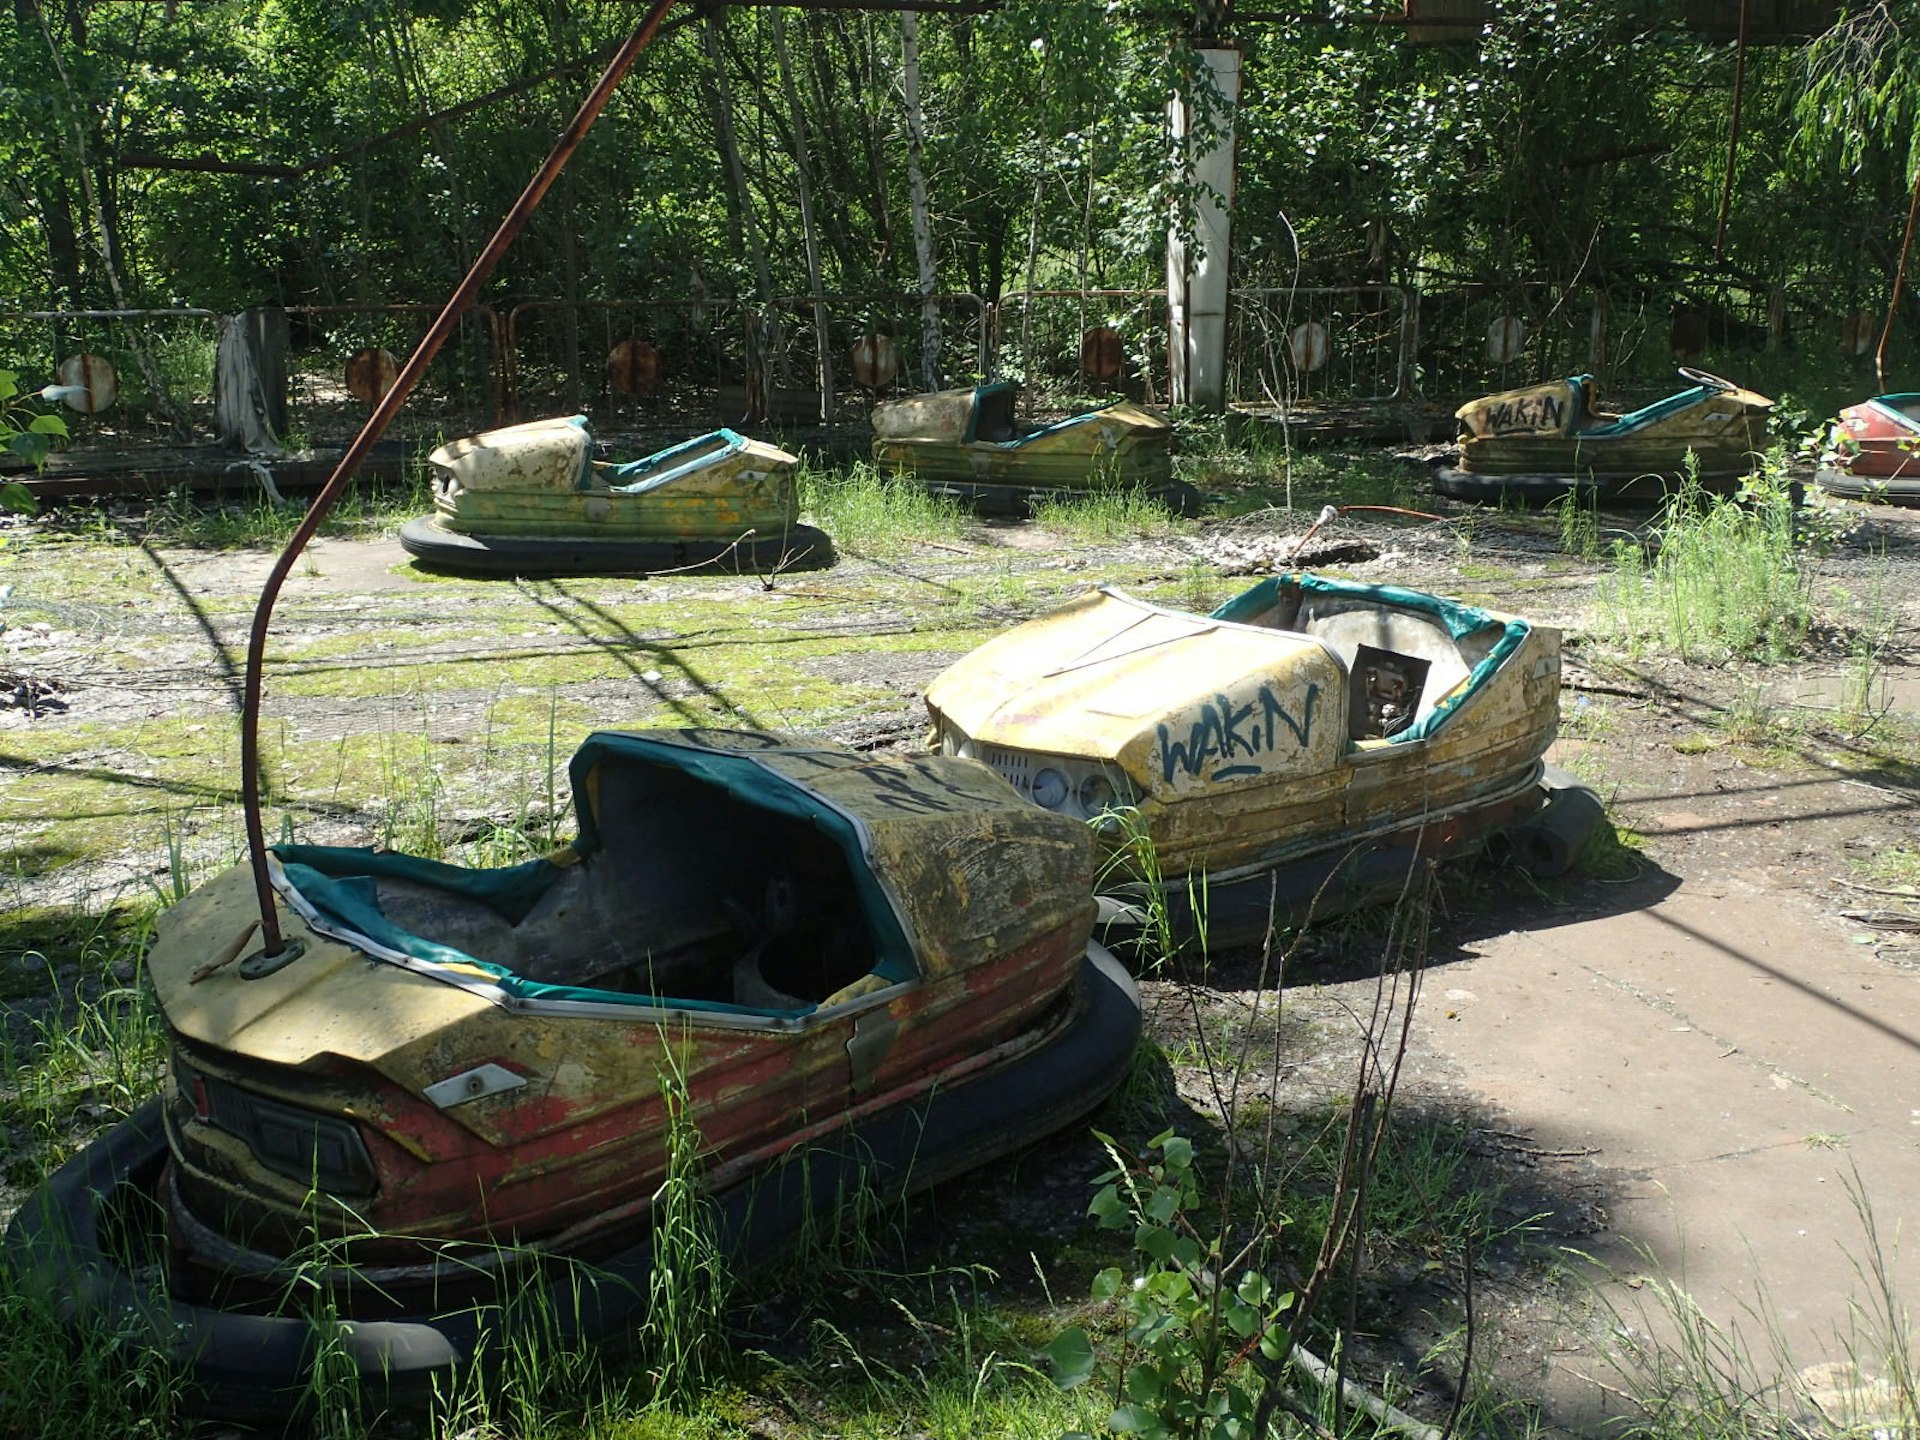 Decaying yellow and blue dodgem cars in Pripyat amusement park, with weeds growing between them and trees in the background.